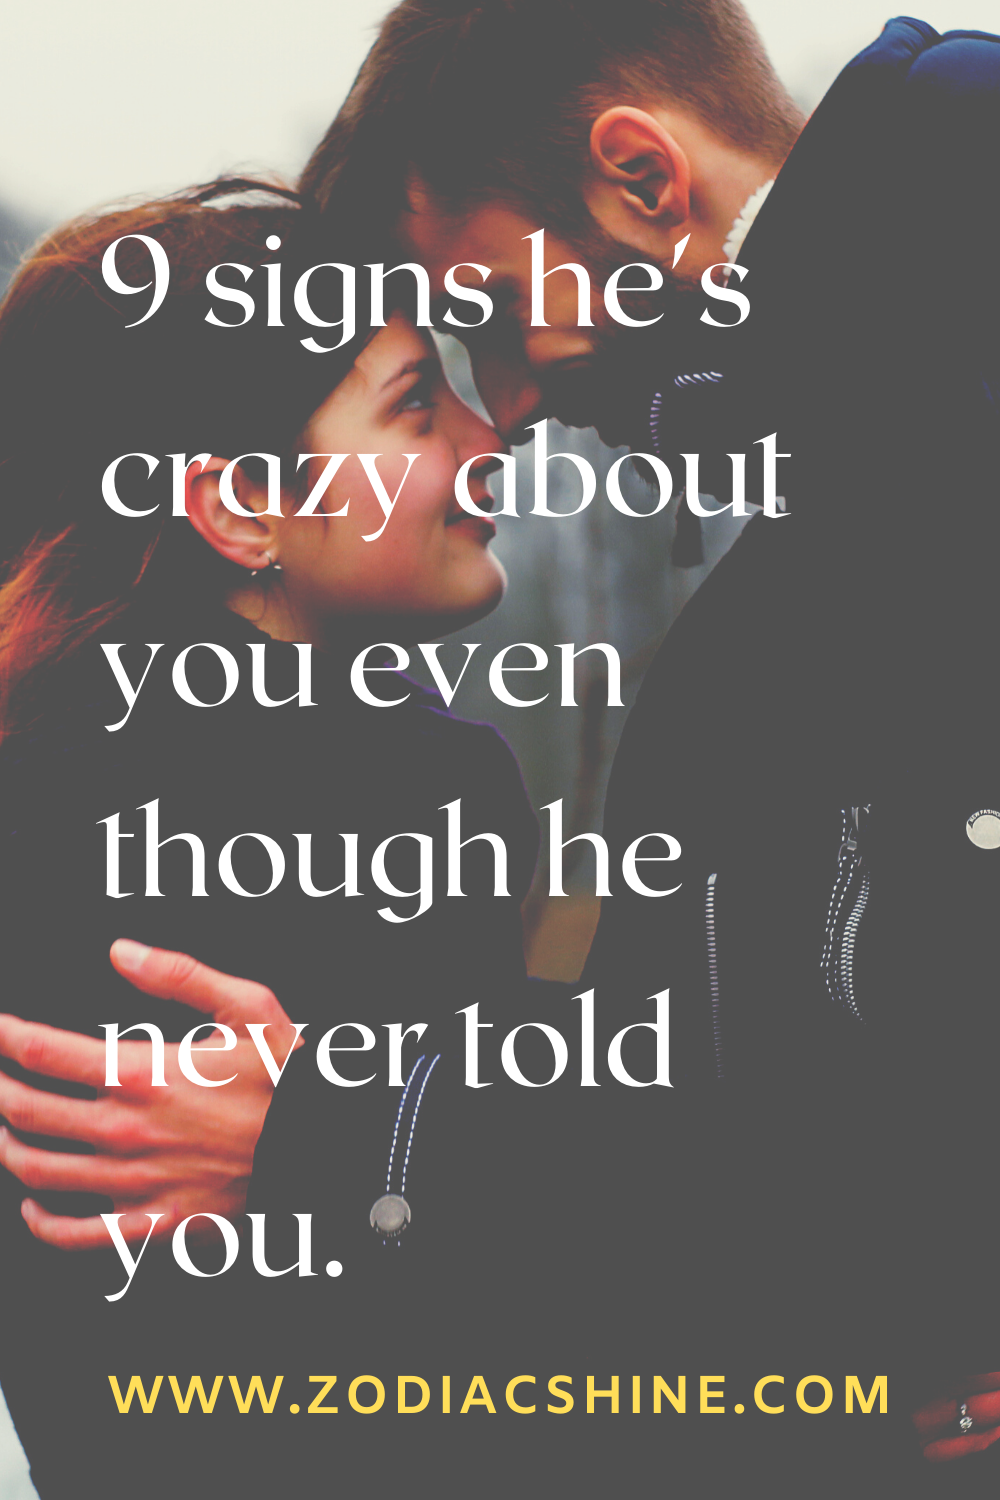 9 signs he's crazy about you even though he never told you.